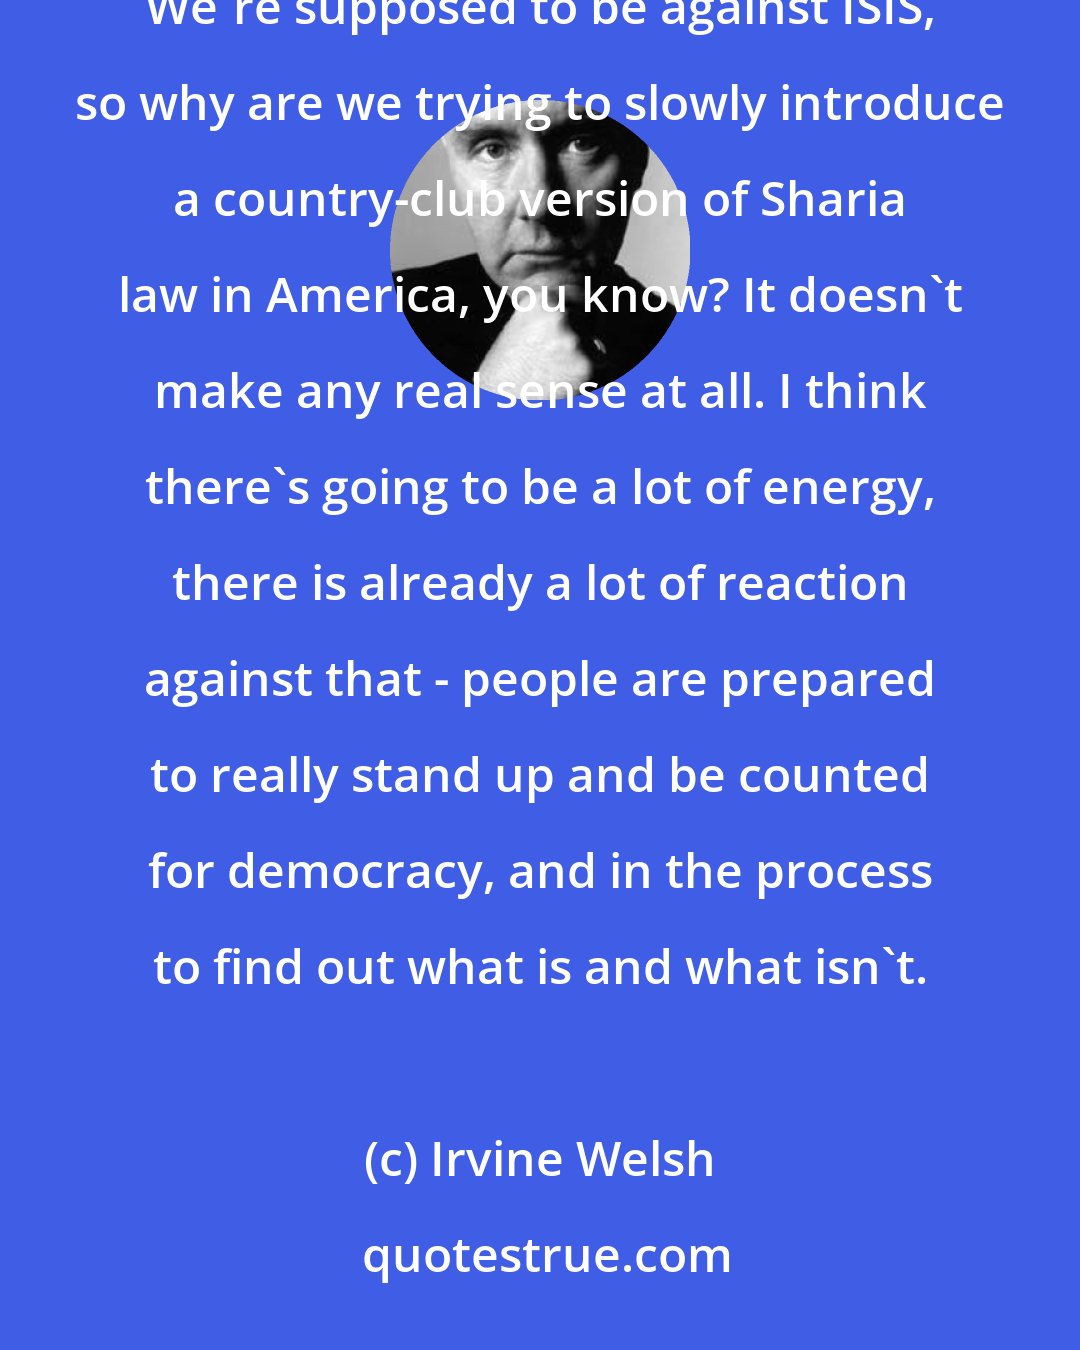 Irvine Welsh: You've got the whole stuff with transgender toilets and stuff like that - that's no way for a government to behave. We're supposed to be against ISIS, so why are we trying to slowly introduce a country-club version of Sharia law in America, you know? It doesn't make any real sense at all. I think there's going to be a lot of energy, there is already a lot of reaction against that - people are prepared to really stand up and be counted for democracy, and in the process to find out what is and what isn't.